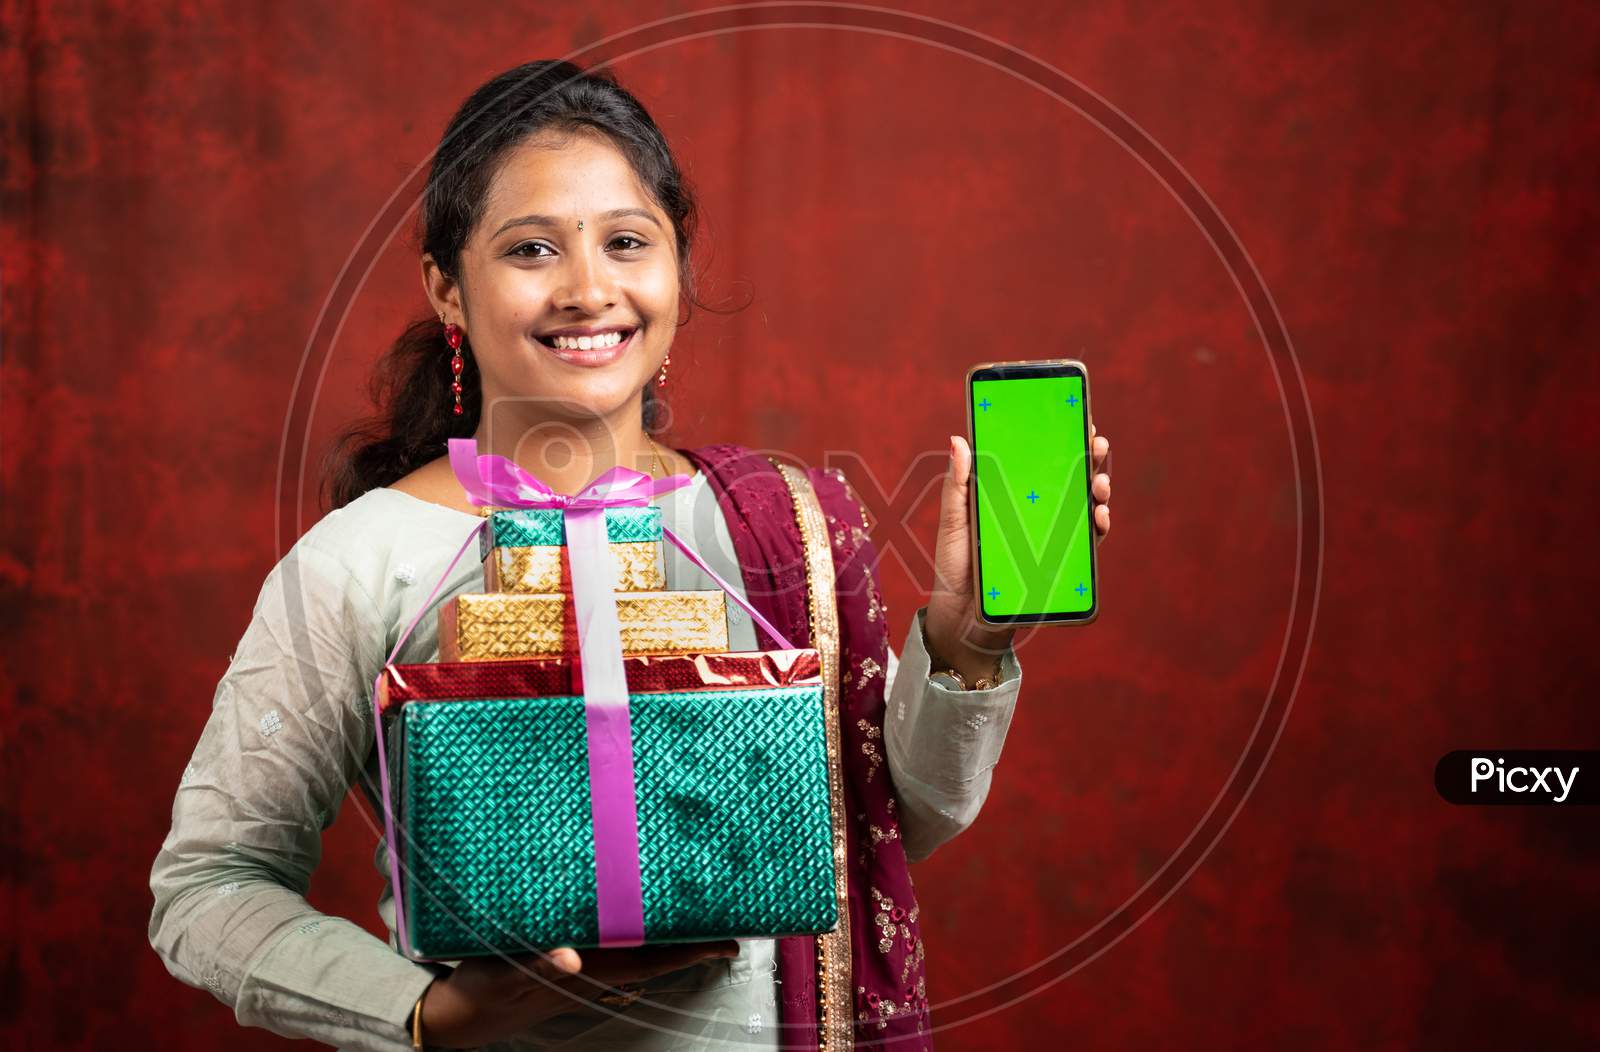 Happy Smiling Indian Girl In Ethnic Dress Holding Gift Boxes And Mobile Phone With Green Screen For Diwali Festival Advertisement By Looking At Camera.